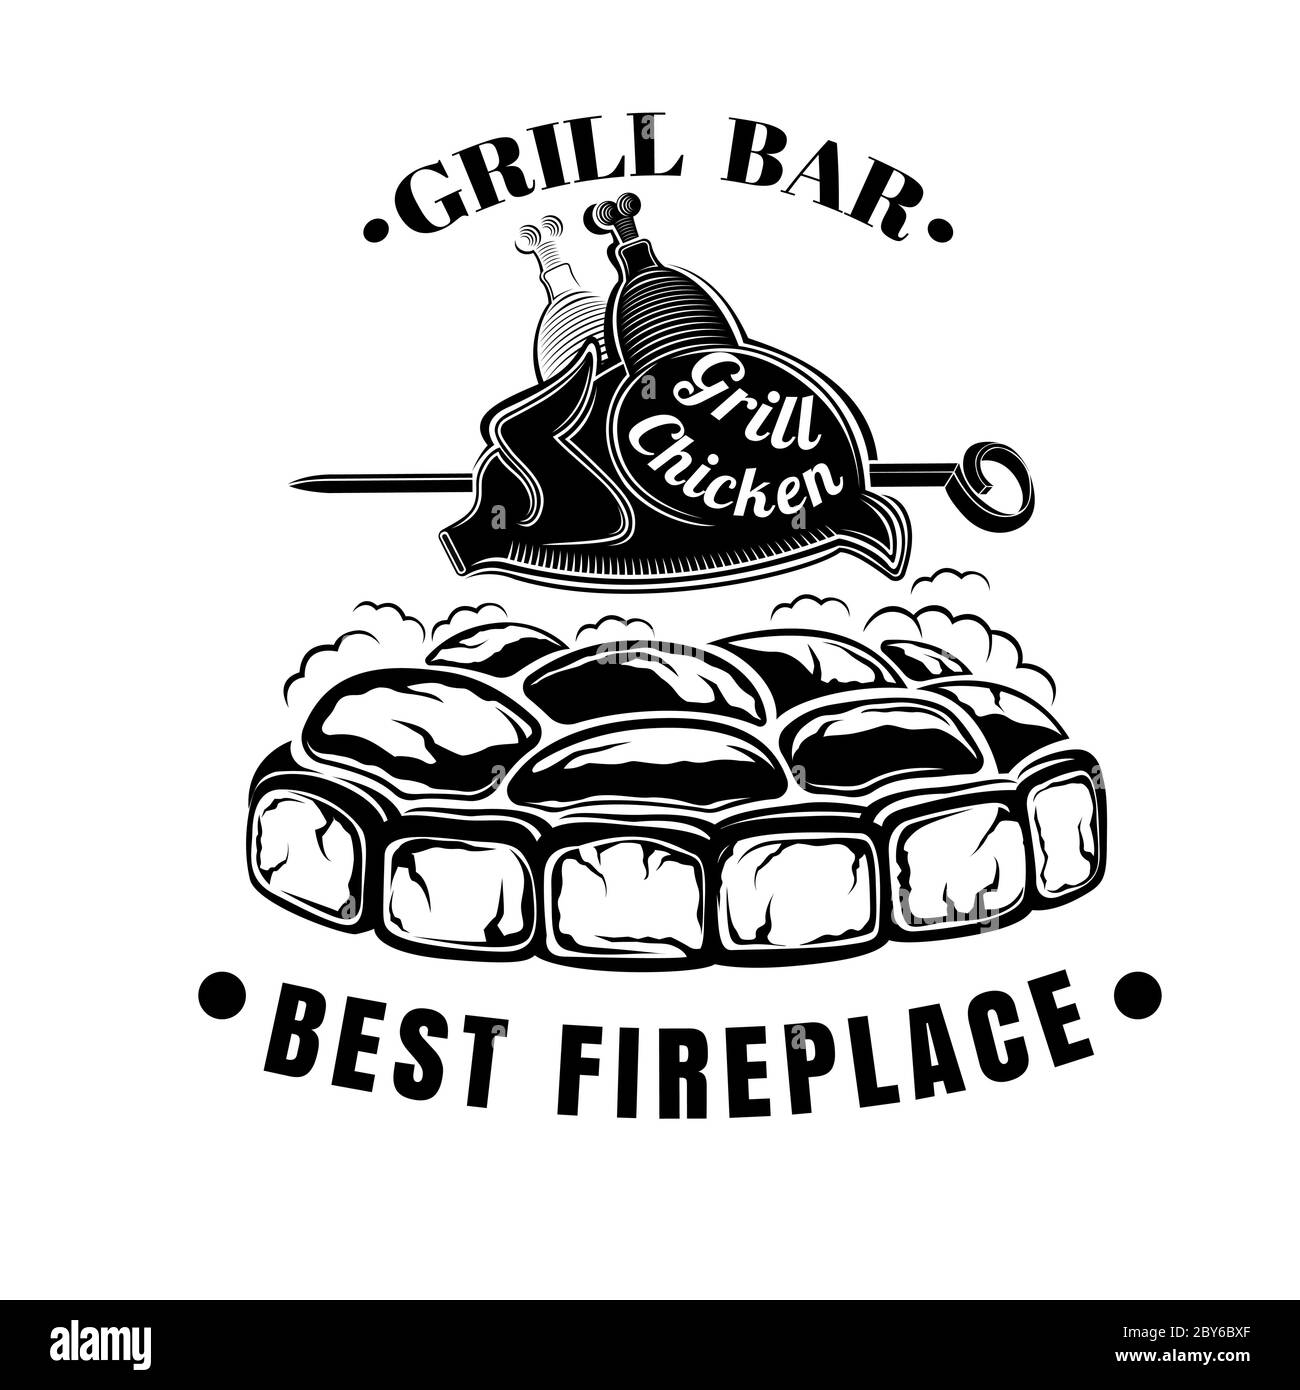 Label for grill bar, BBQ or public house. hicken strung on spit fried on charcoal Stock Vector